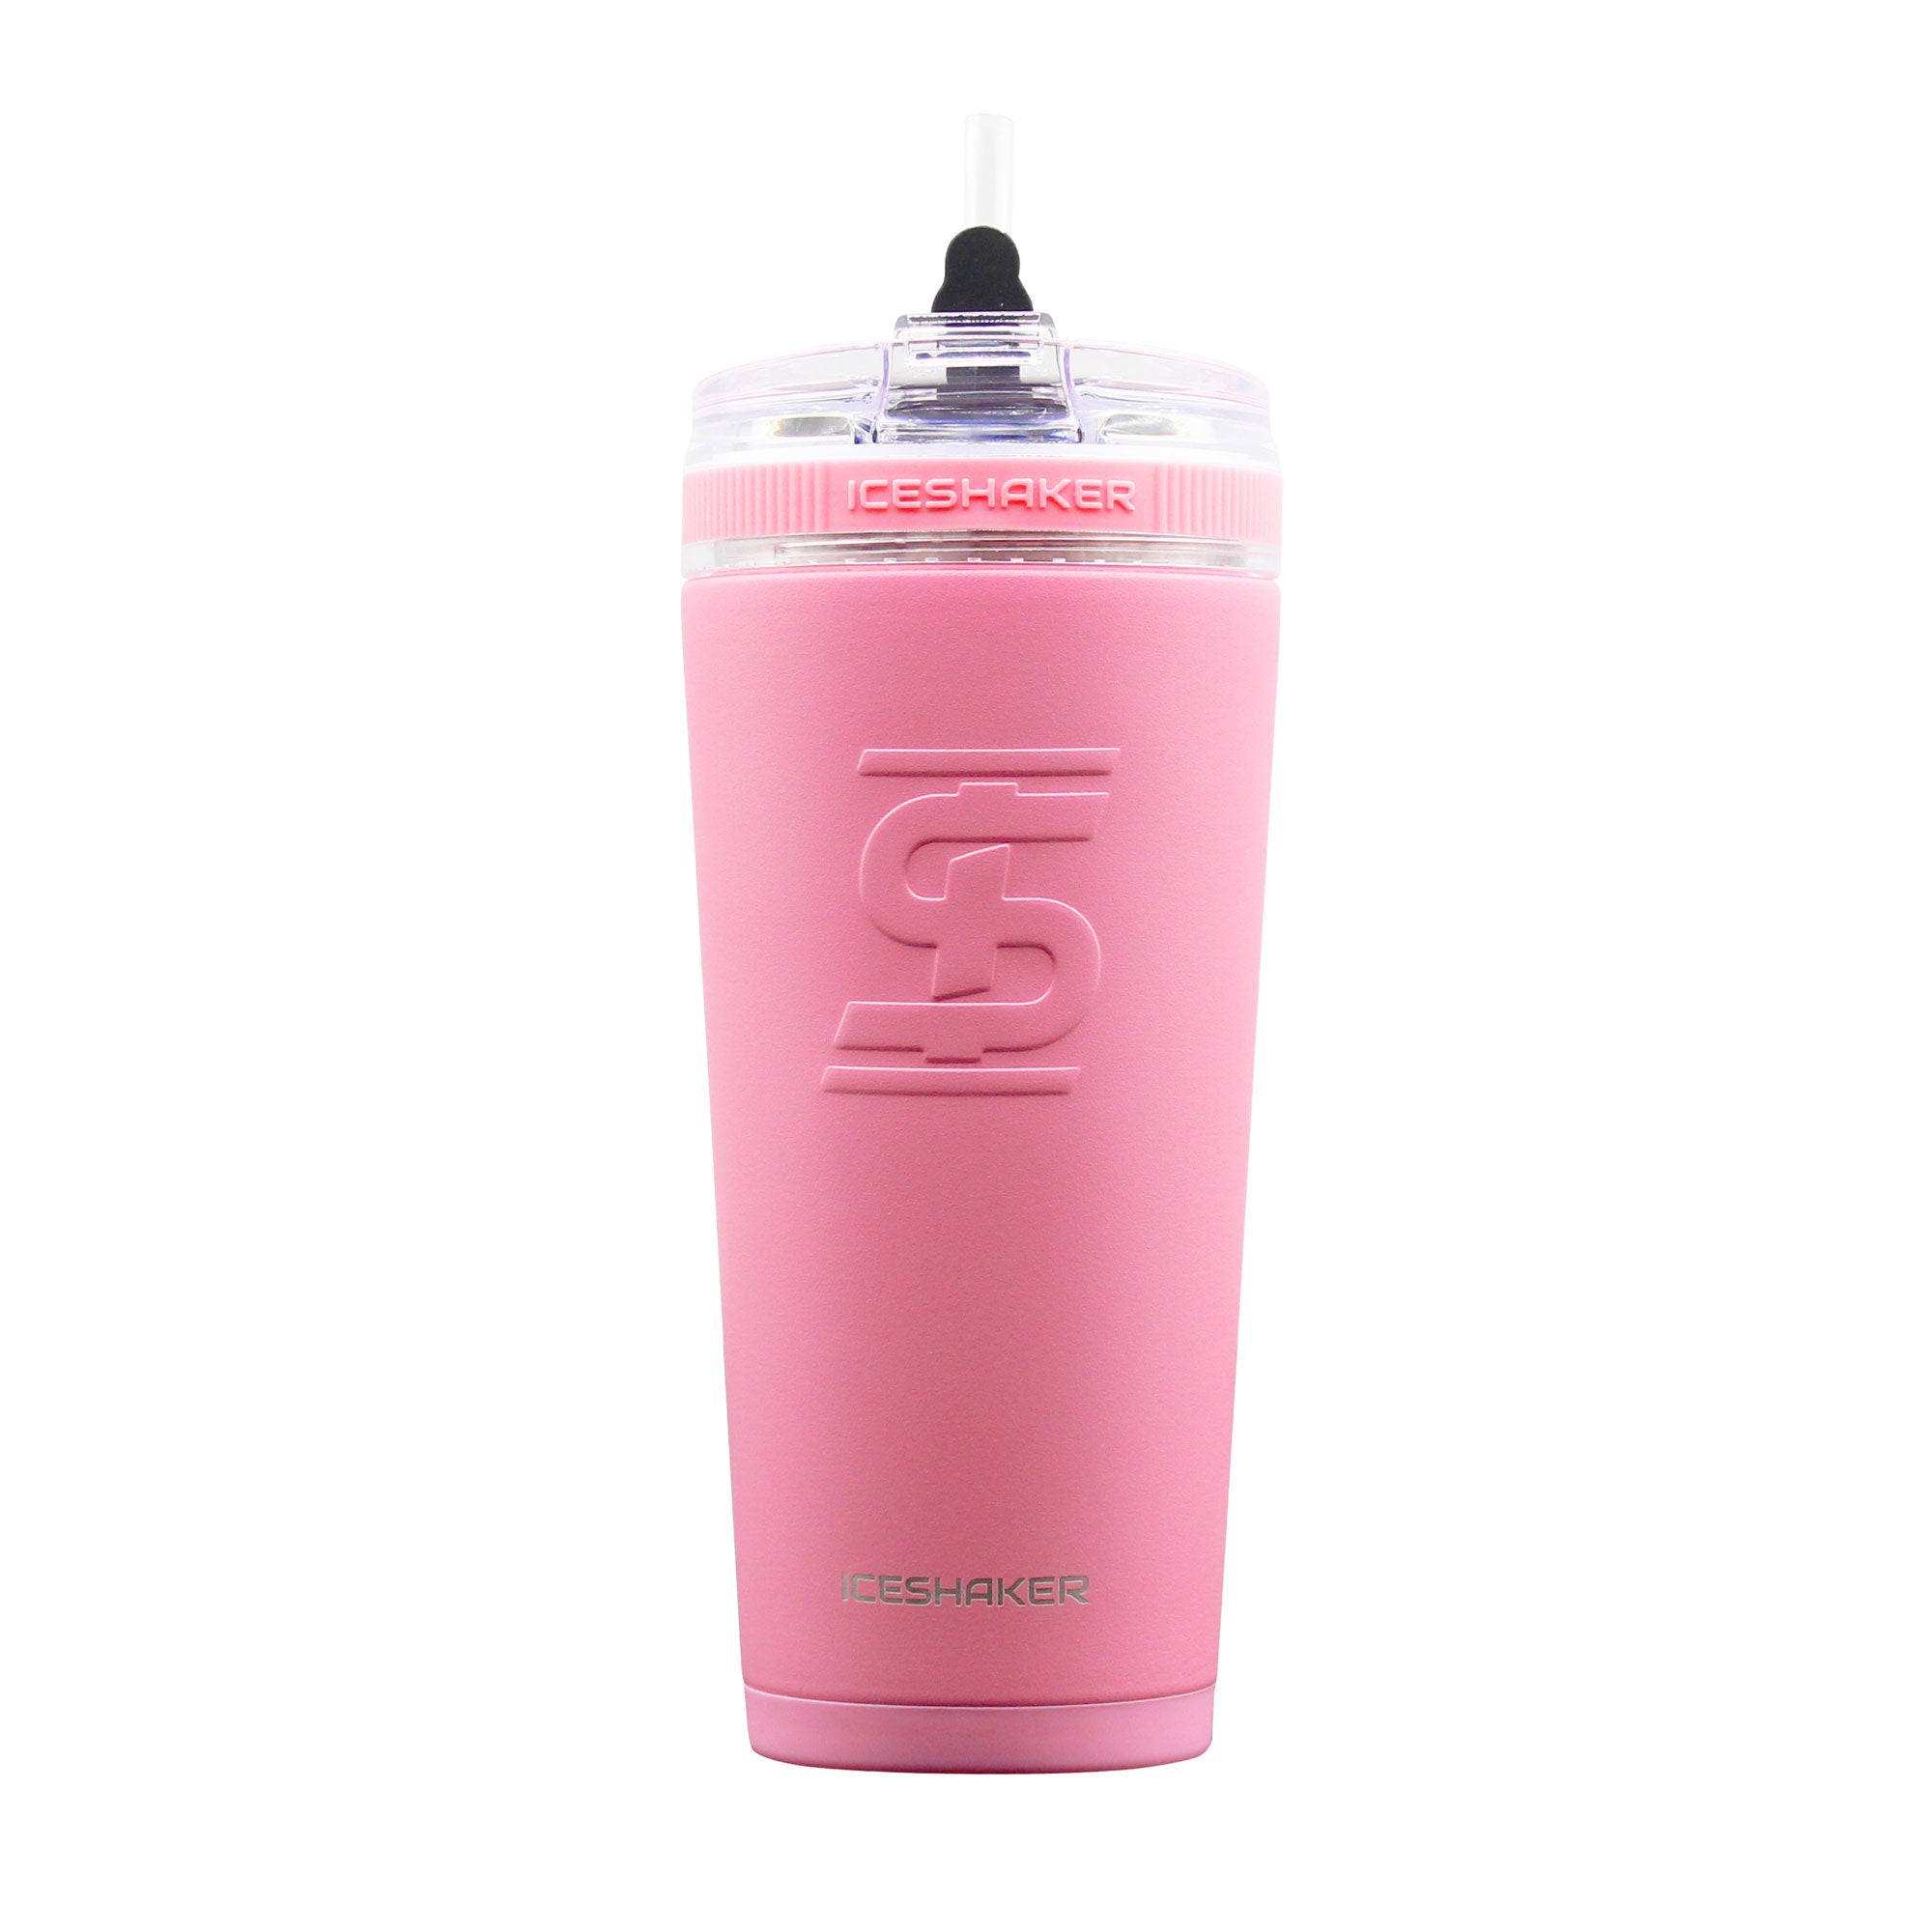 26oz Golf Series Ice Shaker Insulated Bottle - Pimento Cheese